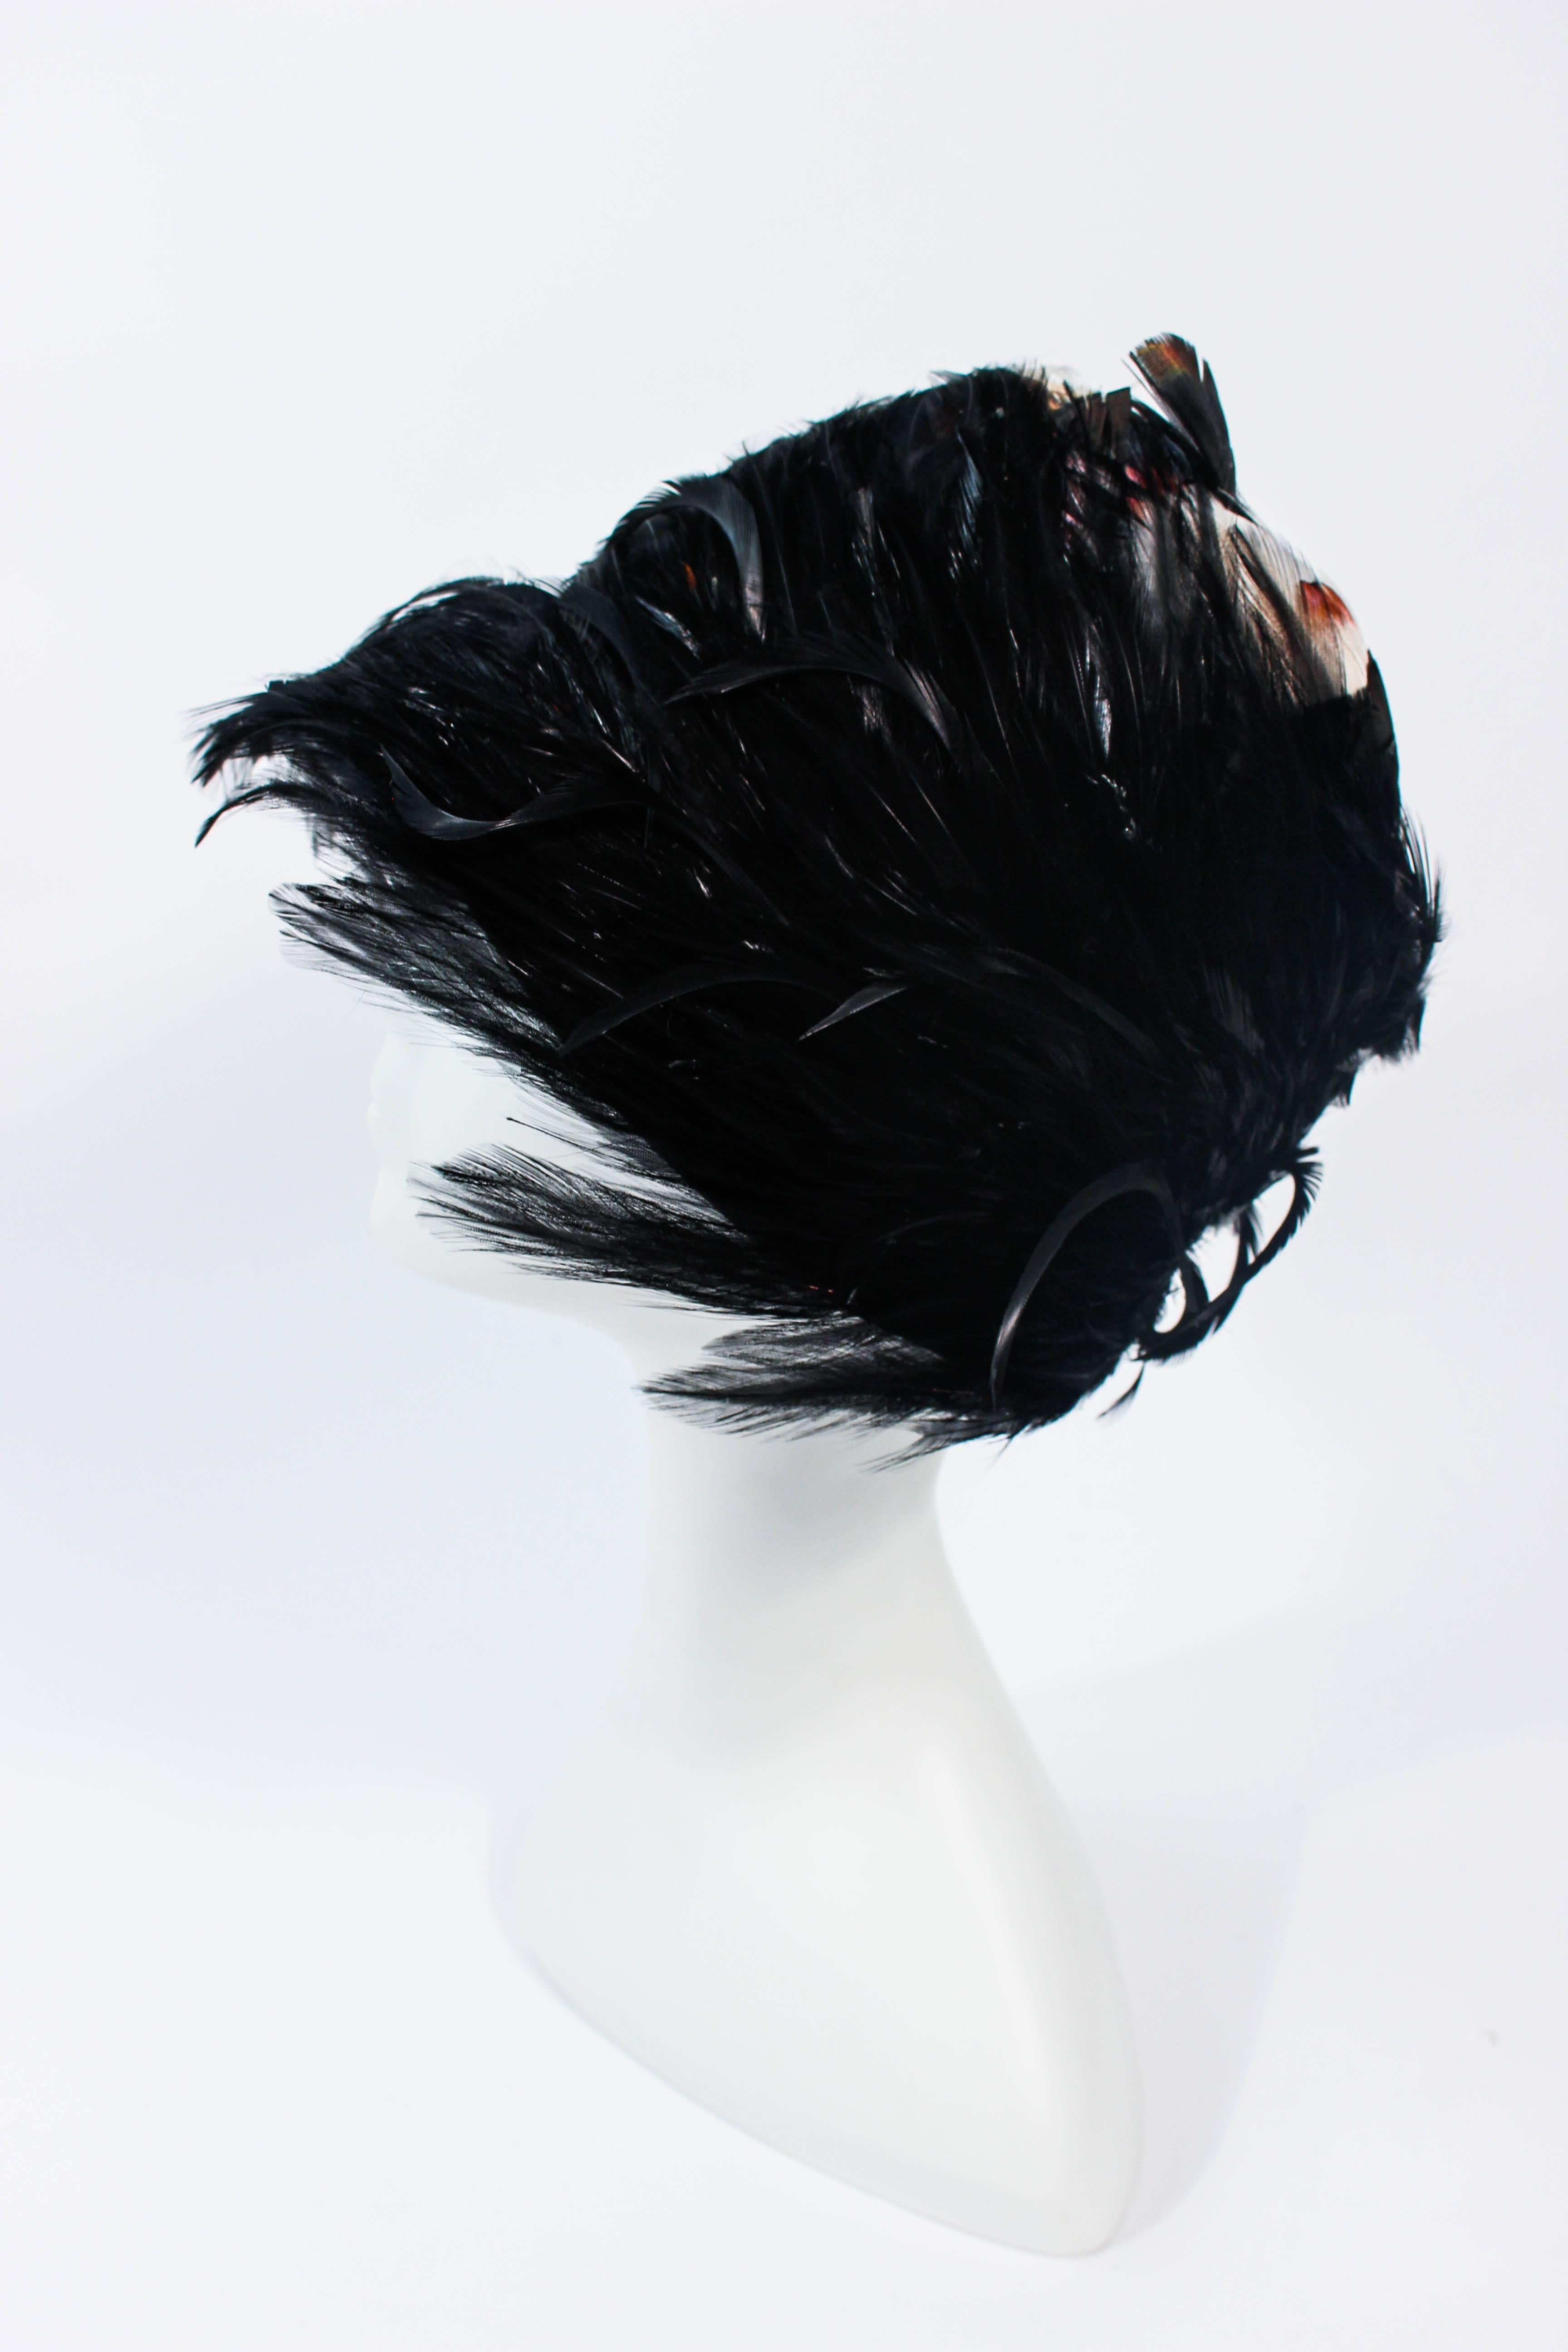 CHRISTIAN DIOR Chapeaux Vintage Black and Cream Feather Cloche Hat 1